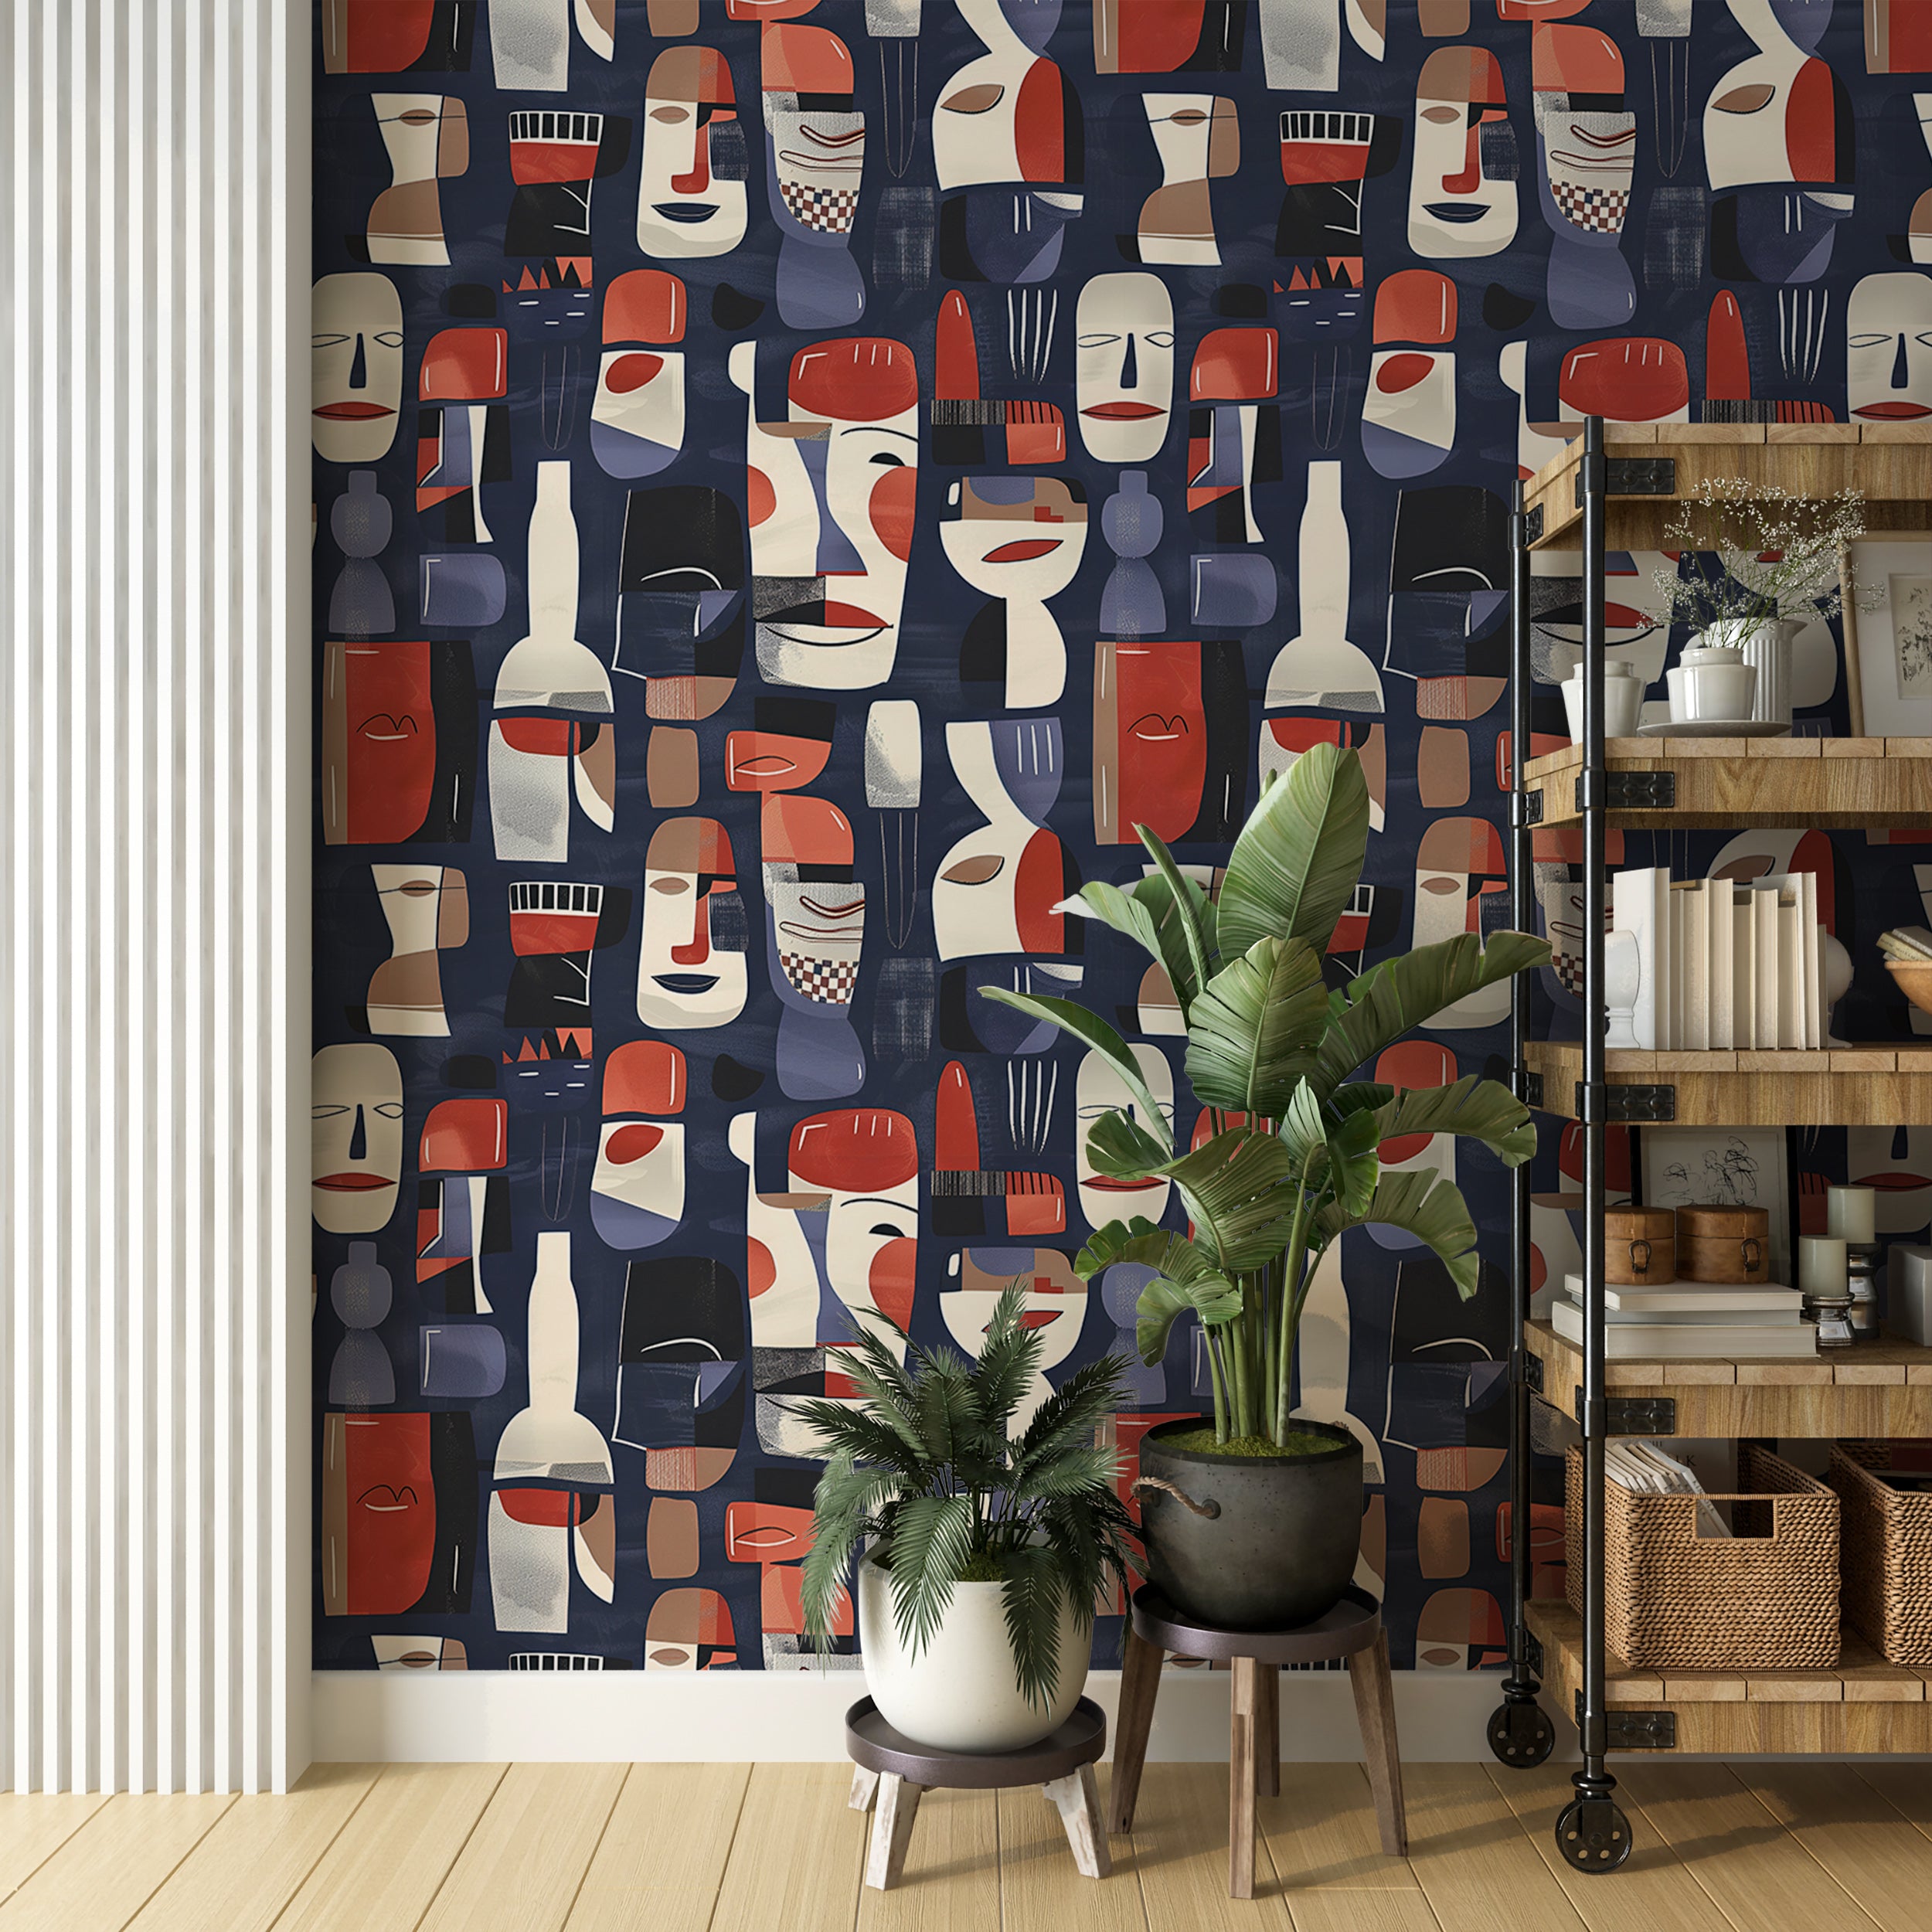 Art Deco geometric shapes wallpaper peel and stick Contemporary abstract faces peel and stick wallpaper